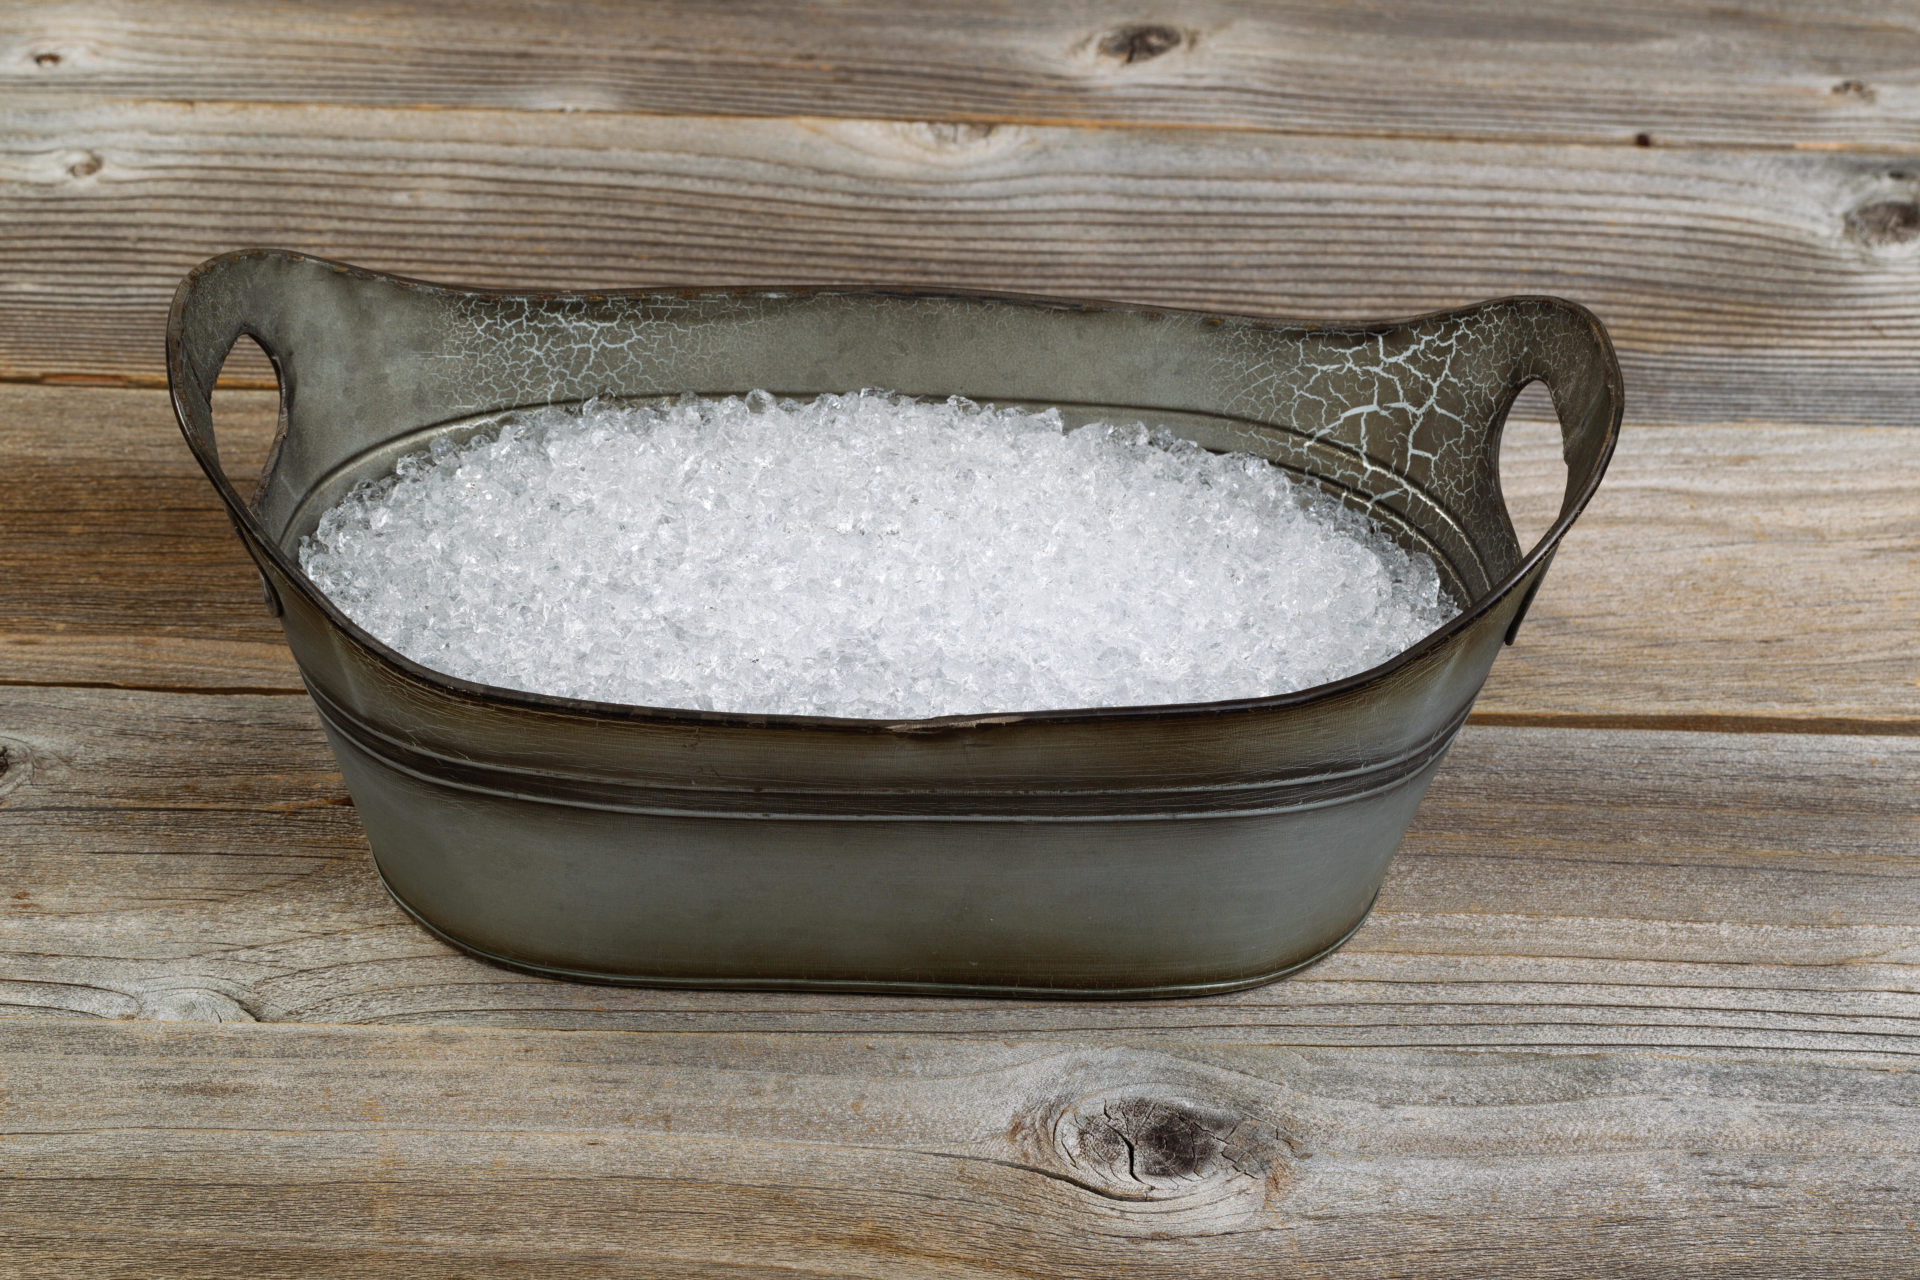 A vintage metal tub filled with ice - the precursor to the plug-in fridge.